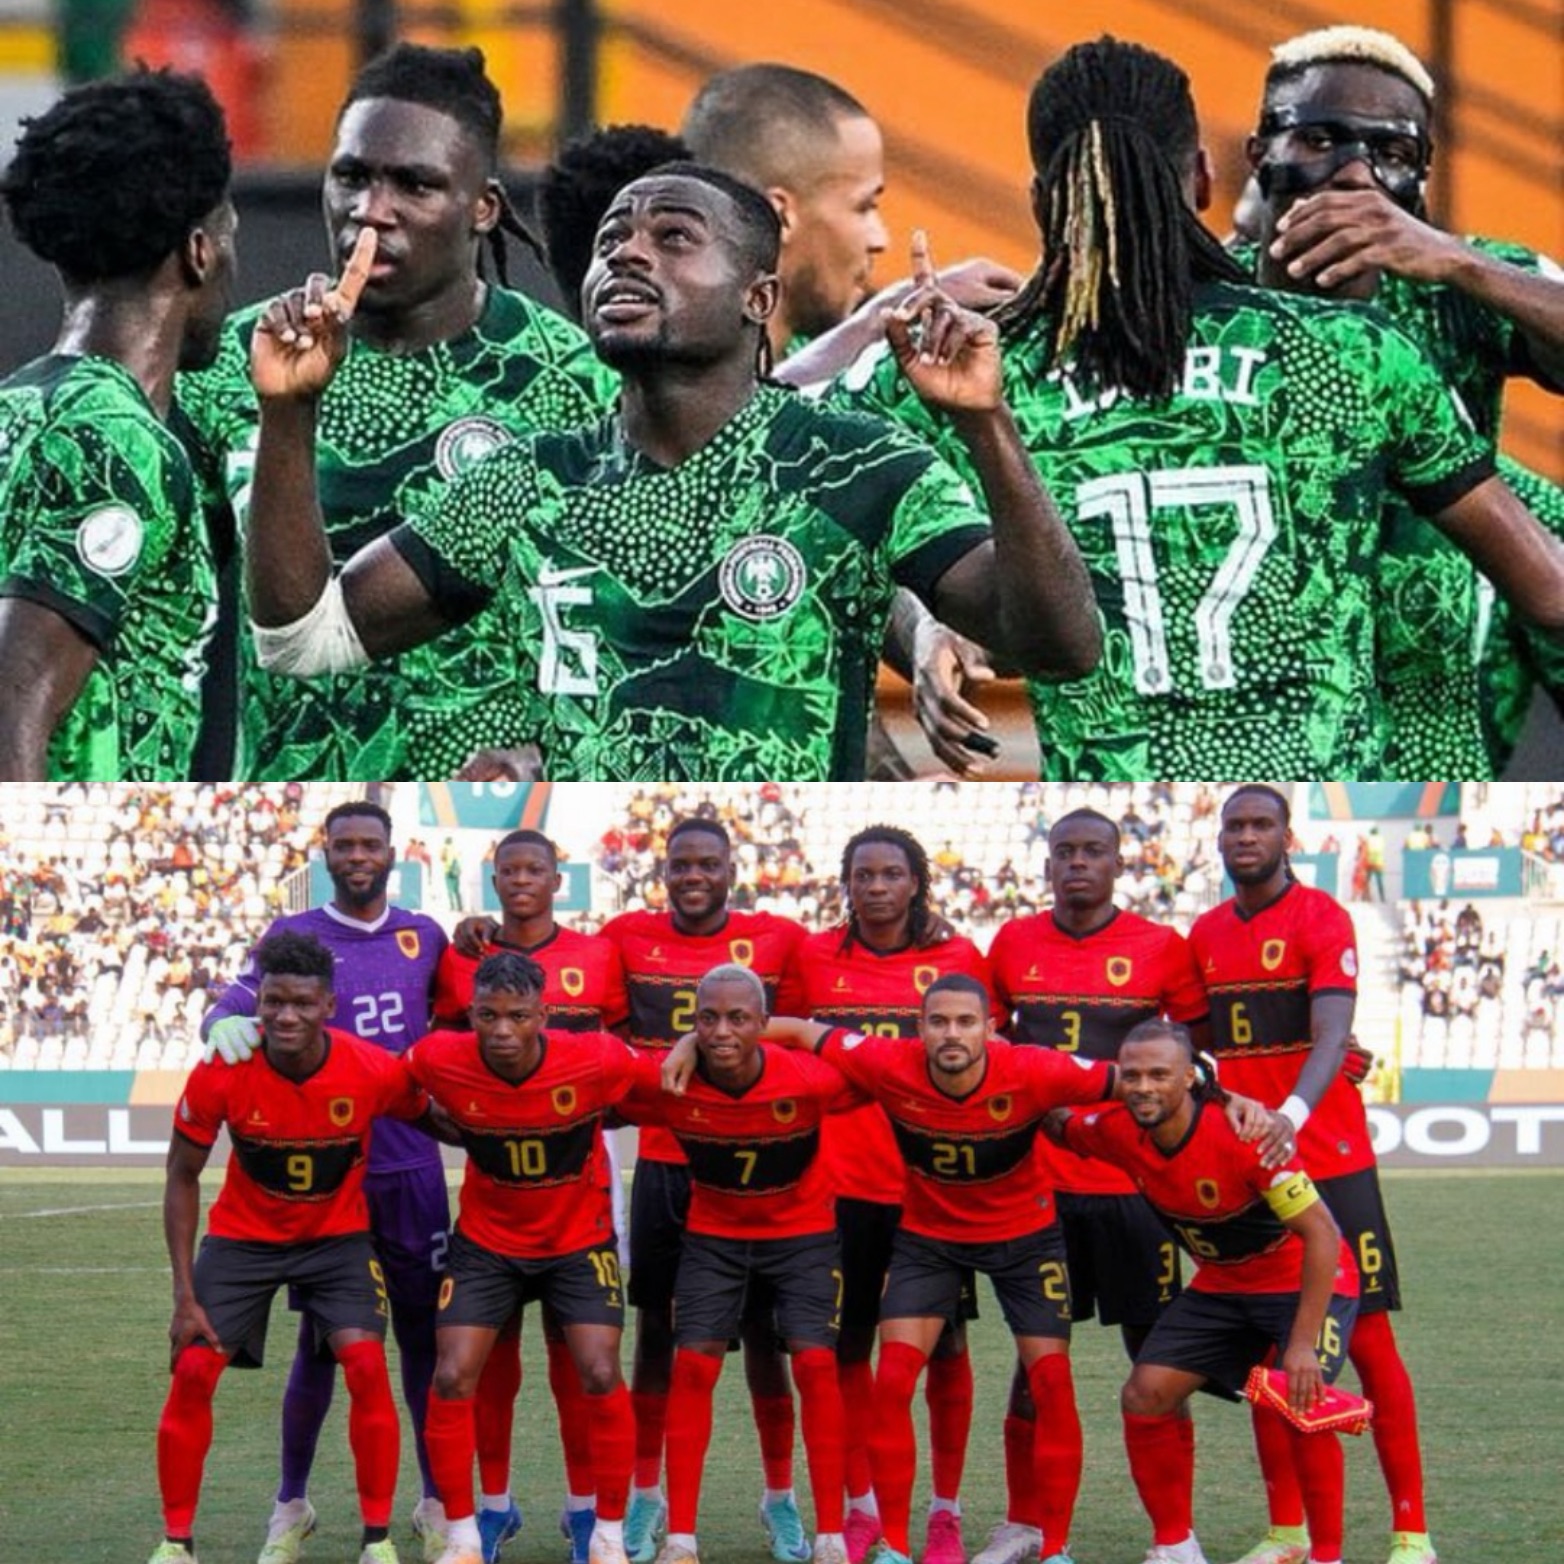 “You completely outplayed us” Angola congratulates Nigeria on the victory